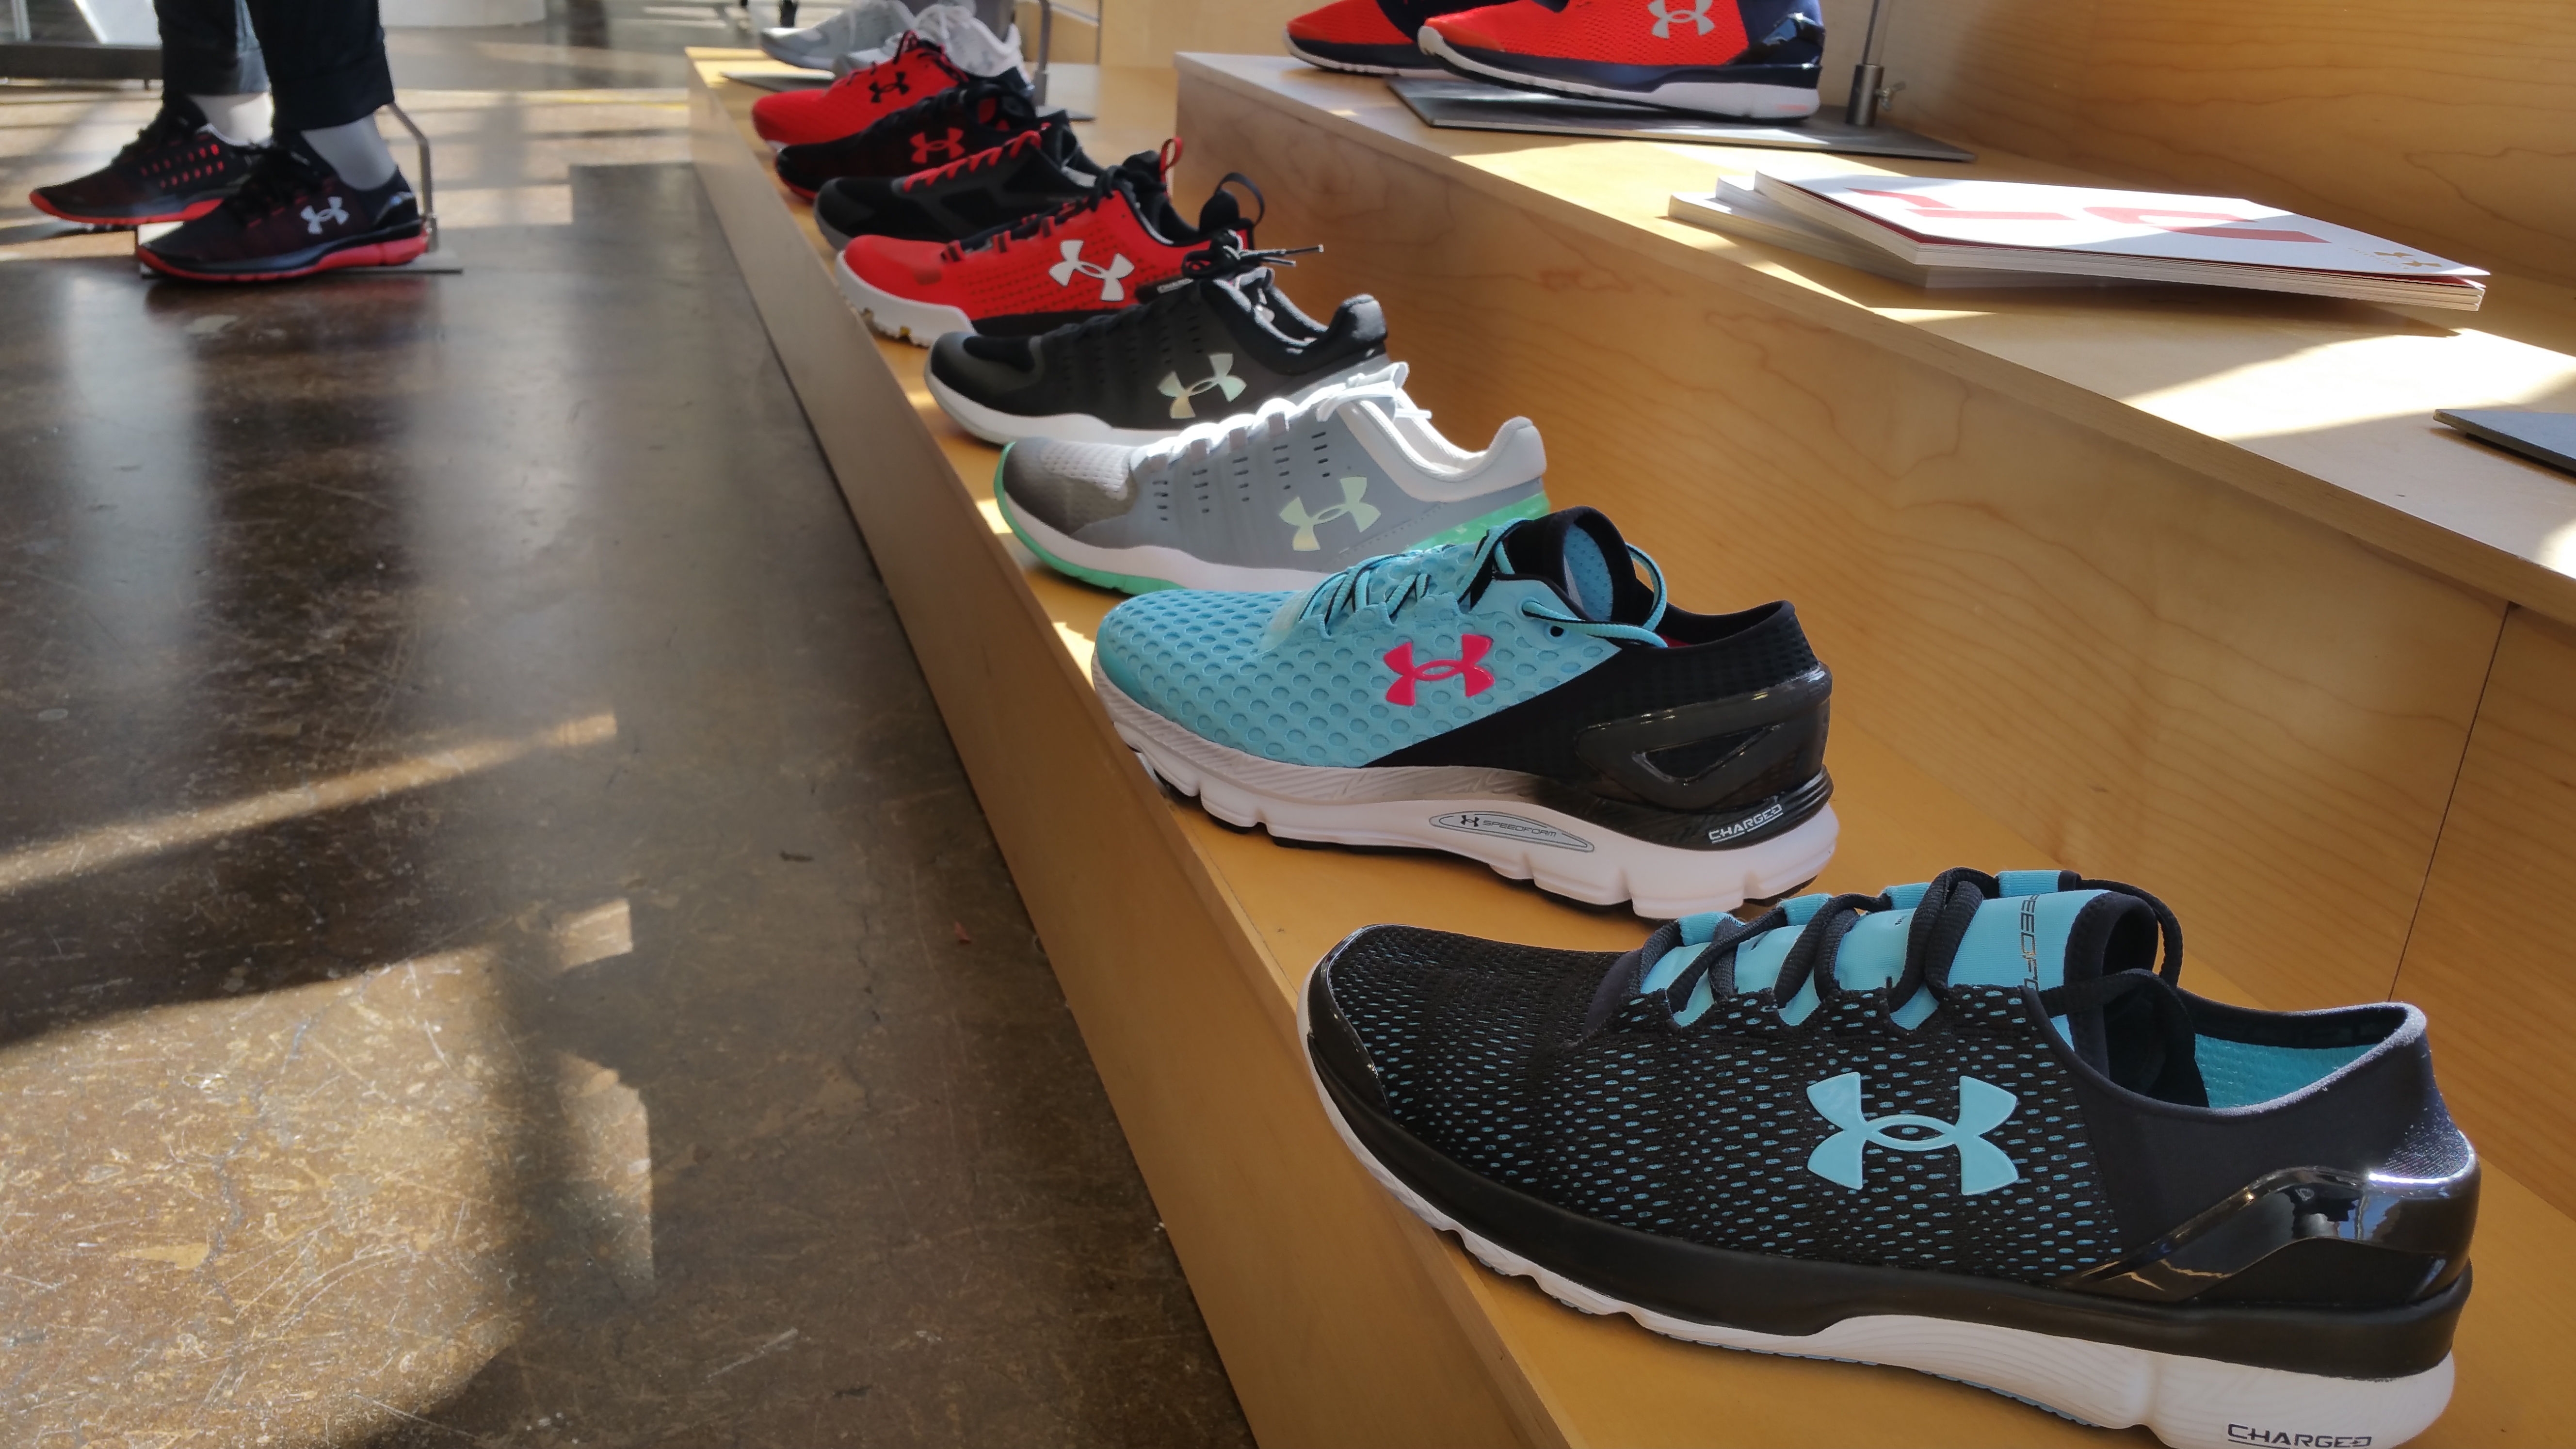 womens red under armour shoes